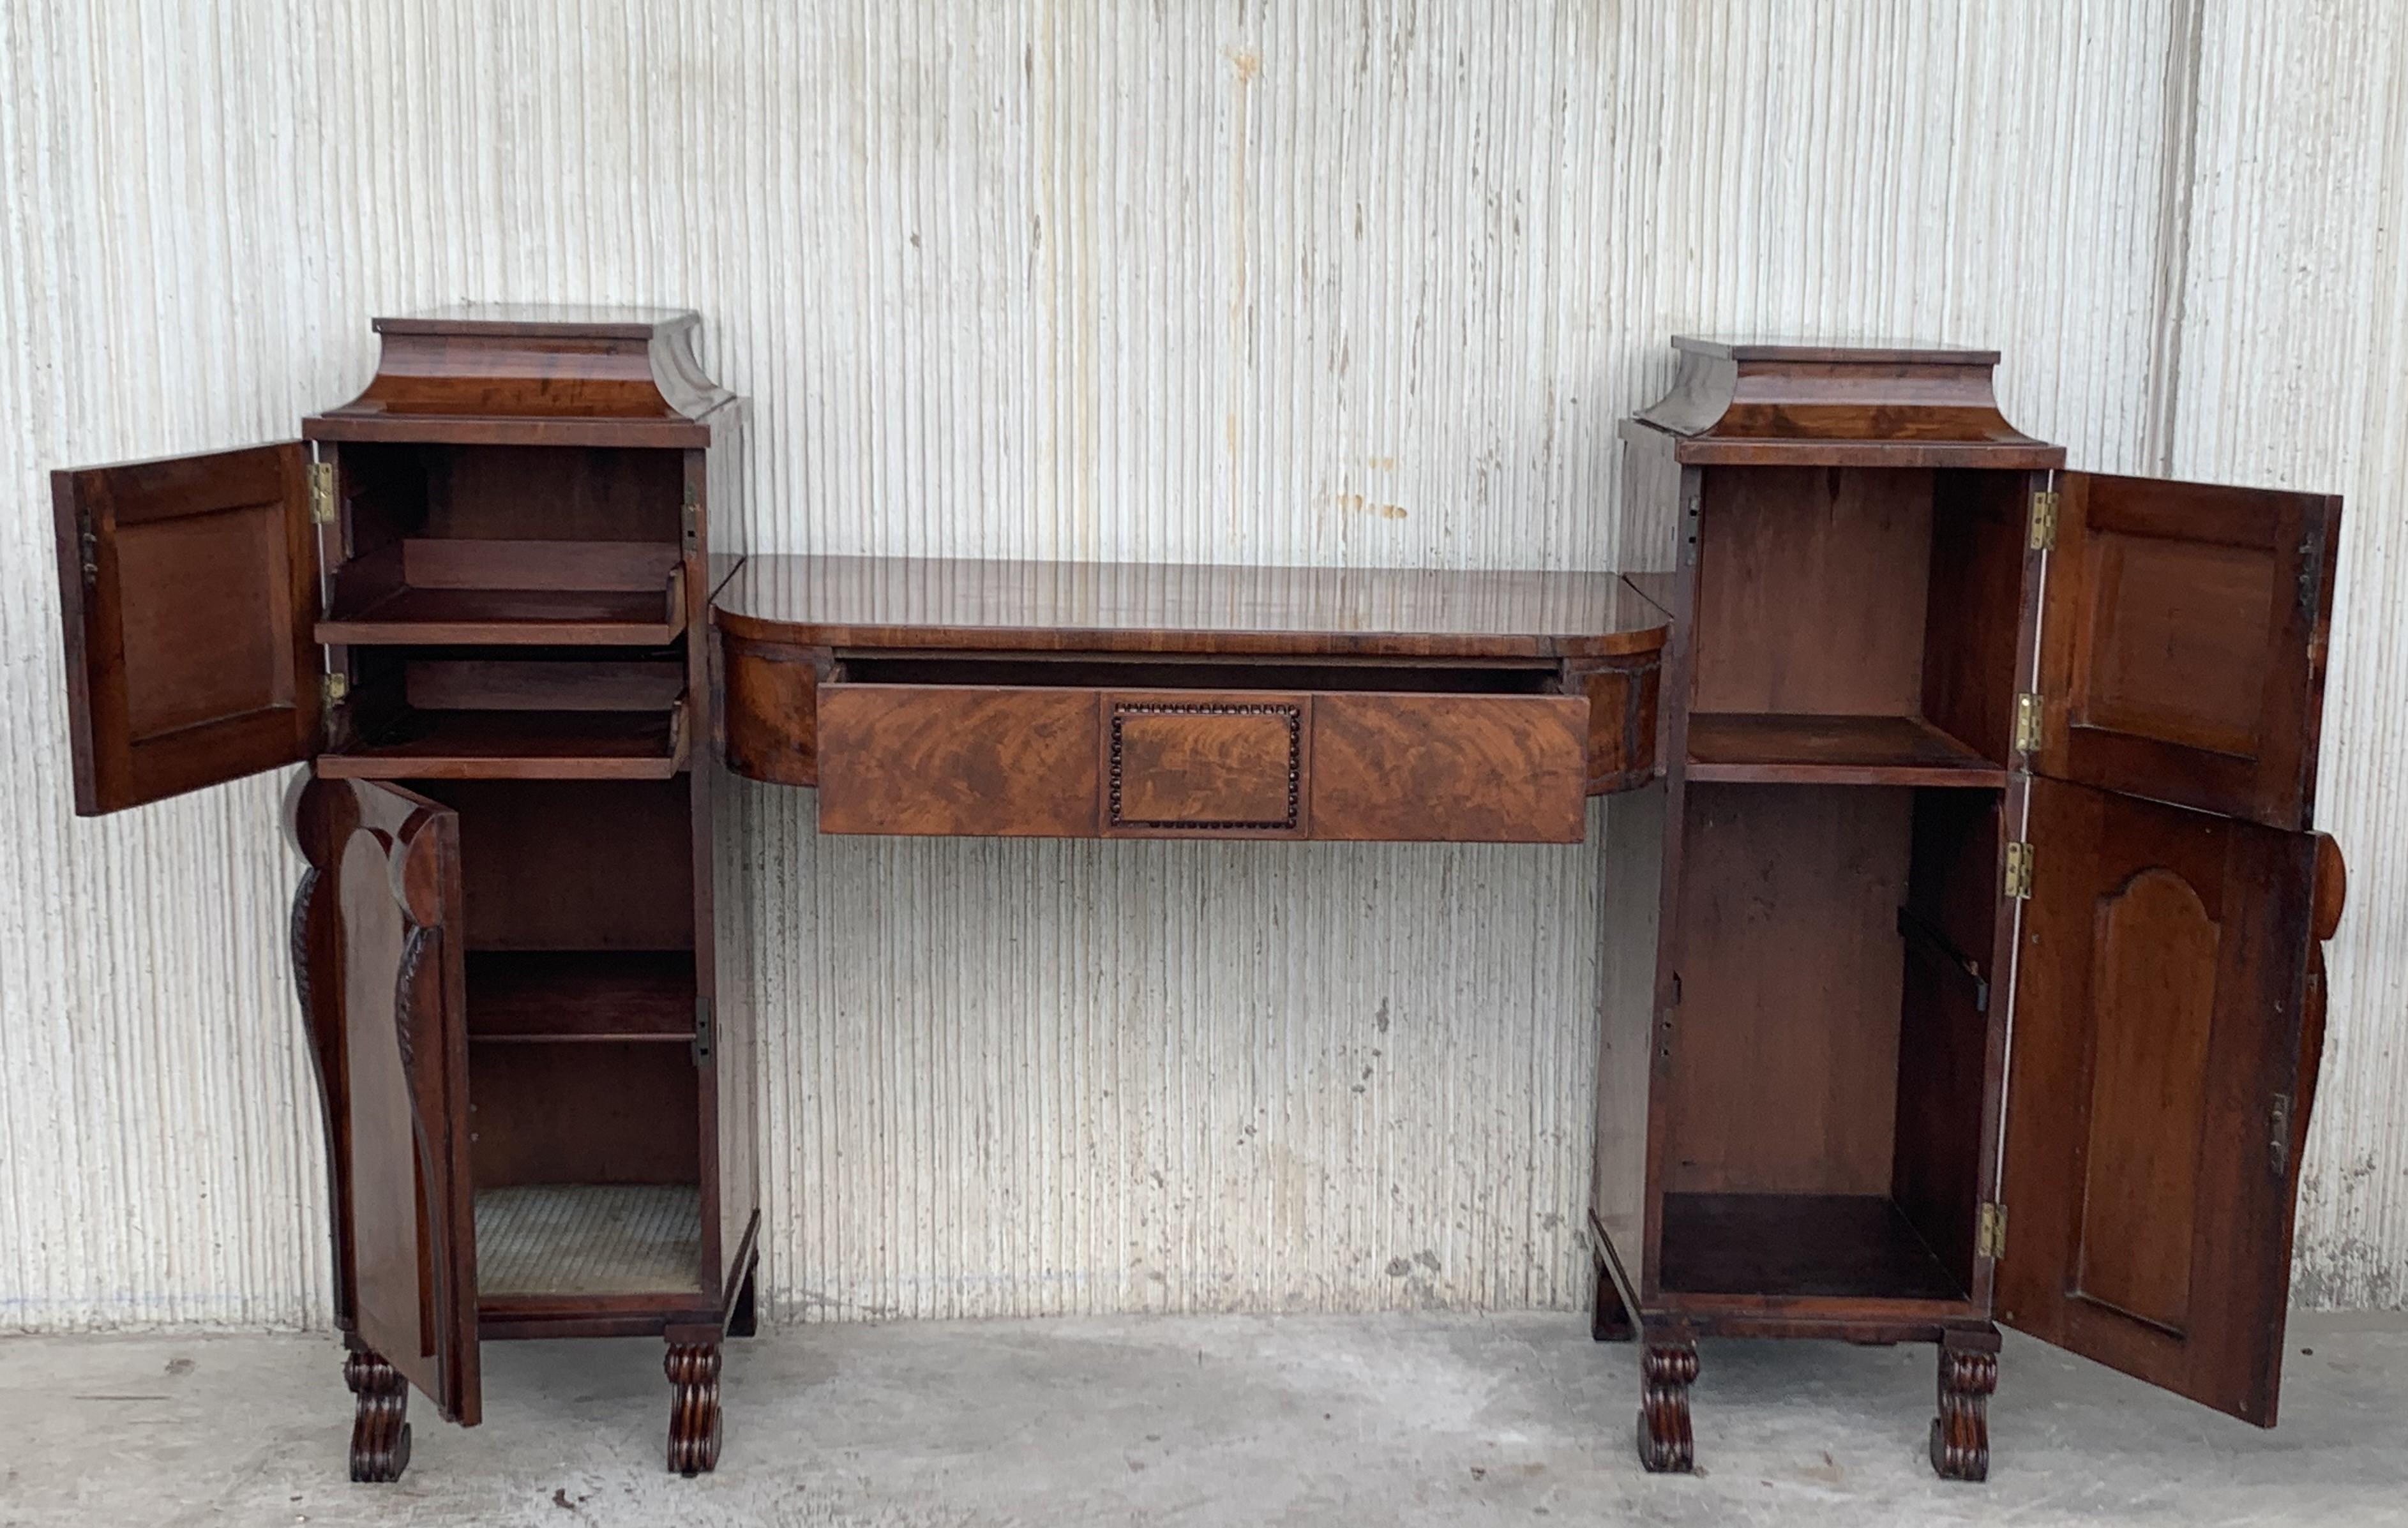 Mahogany veneered Biedermeier vanity desk with two pilaster as well as columns at the front with ebonized bases and capitals. The doors are opened via a pressure mechanism. The tabletop has a drawer and the interior columns consists of several